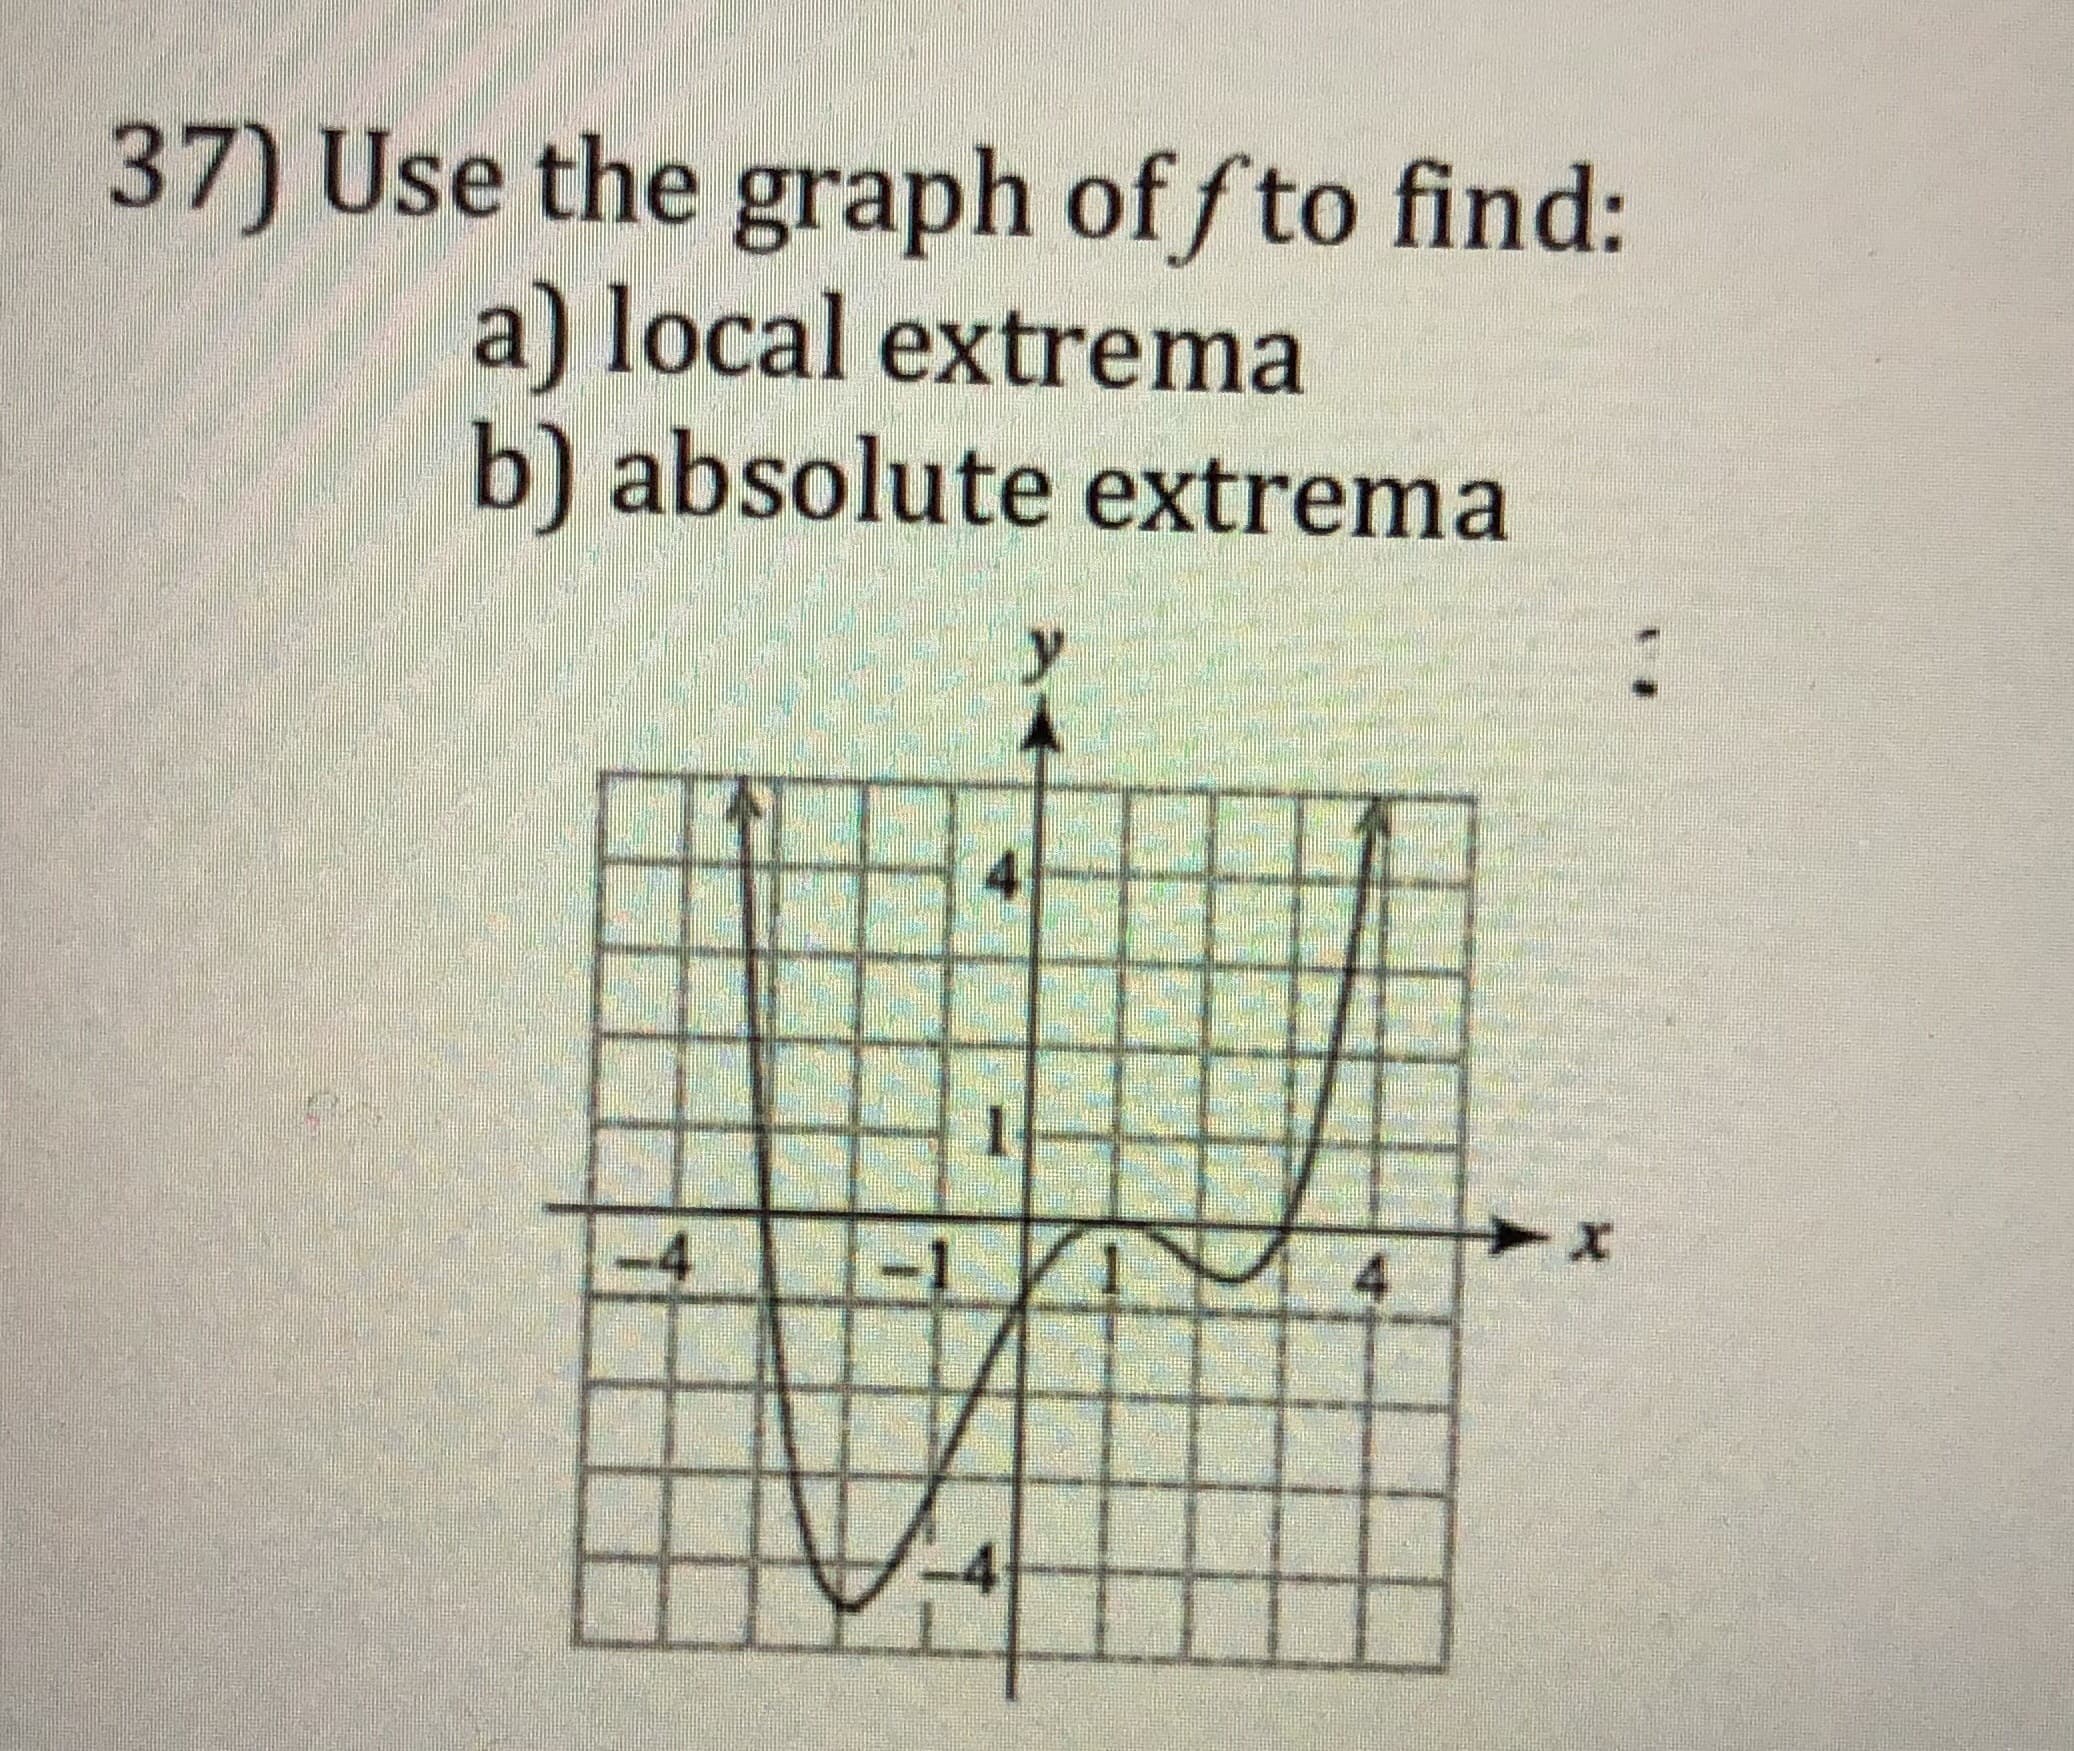 37) Use the graph of /to find:
a) local extrema
b) absolute extrema
